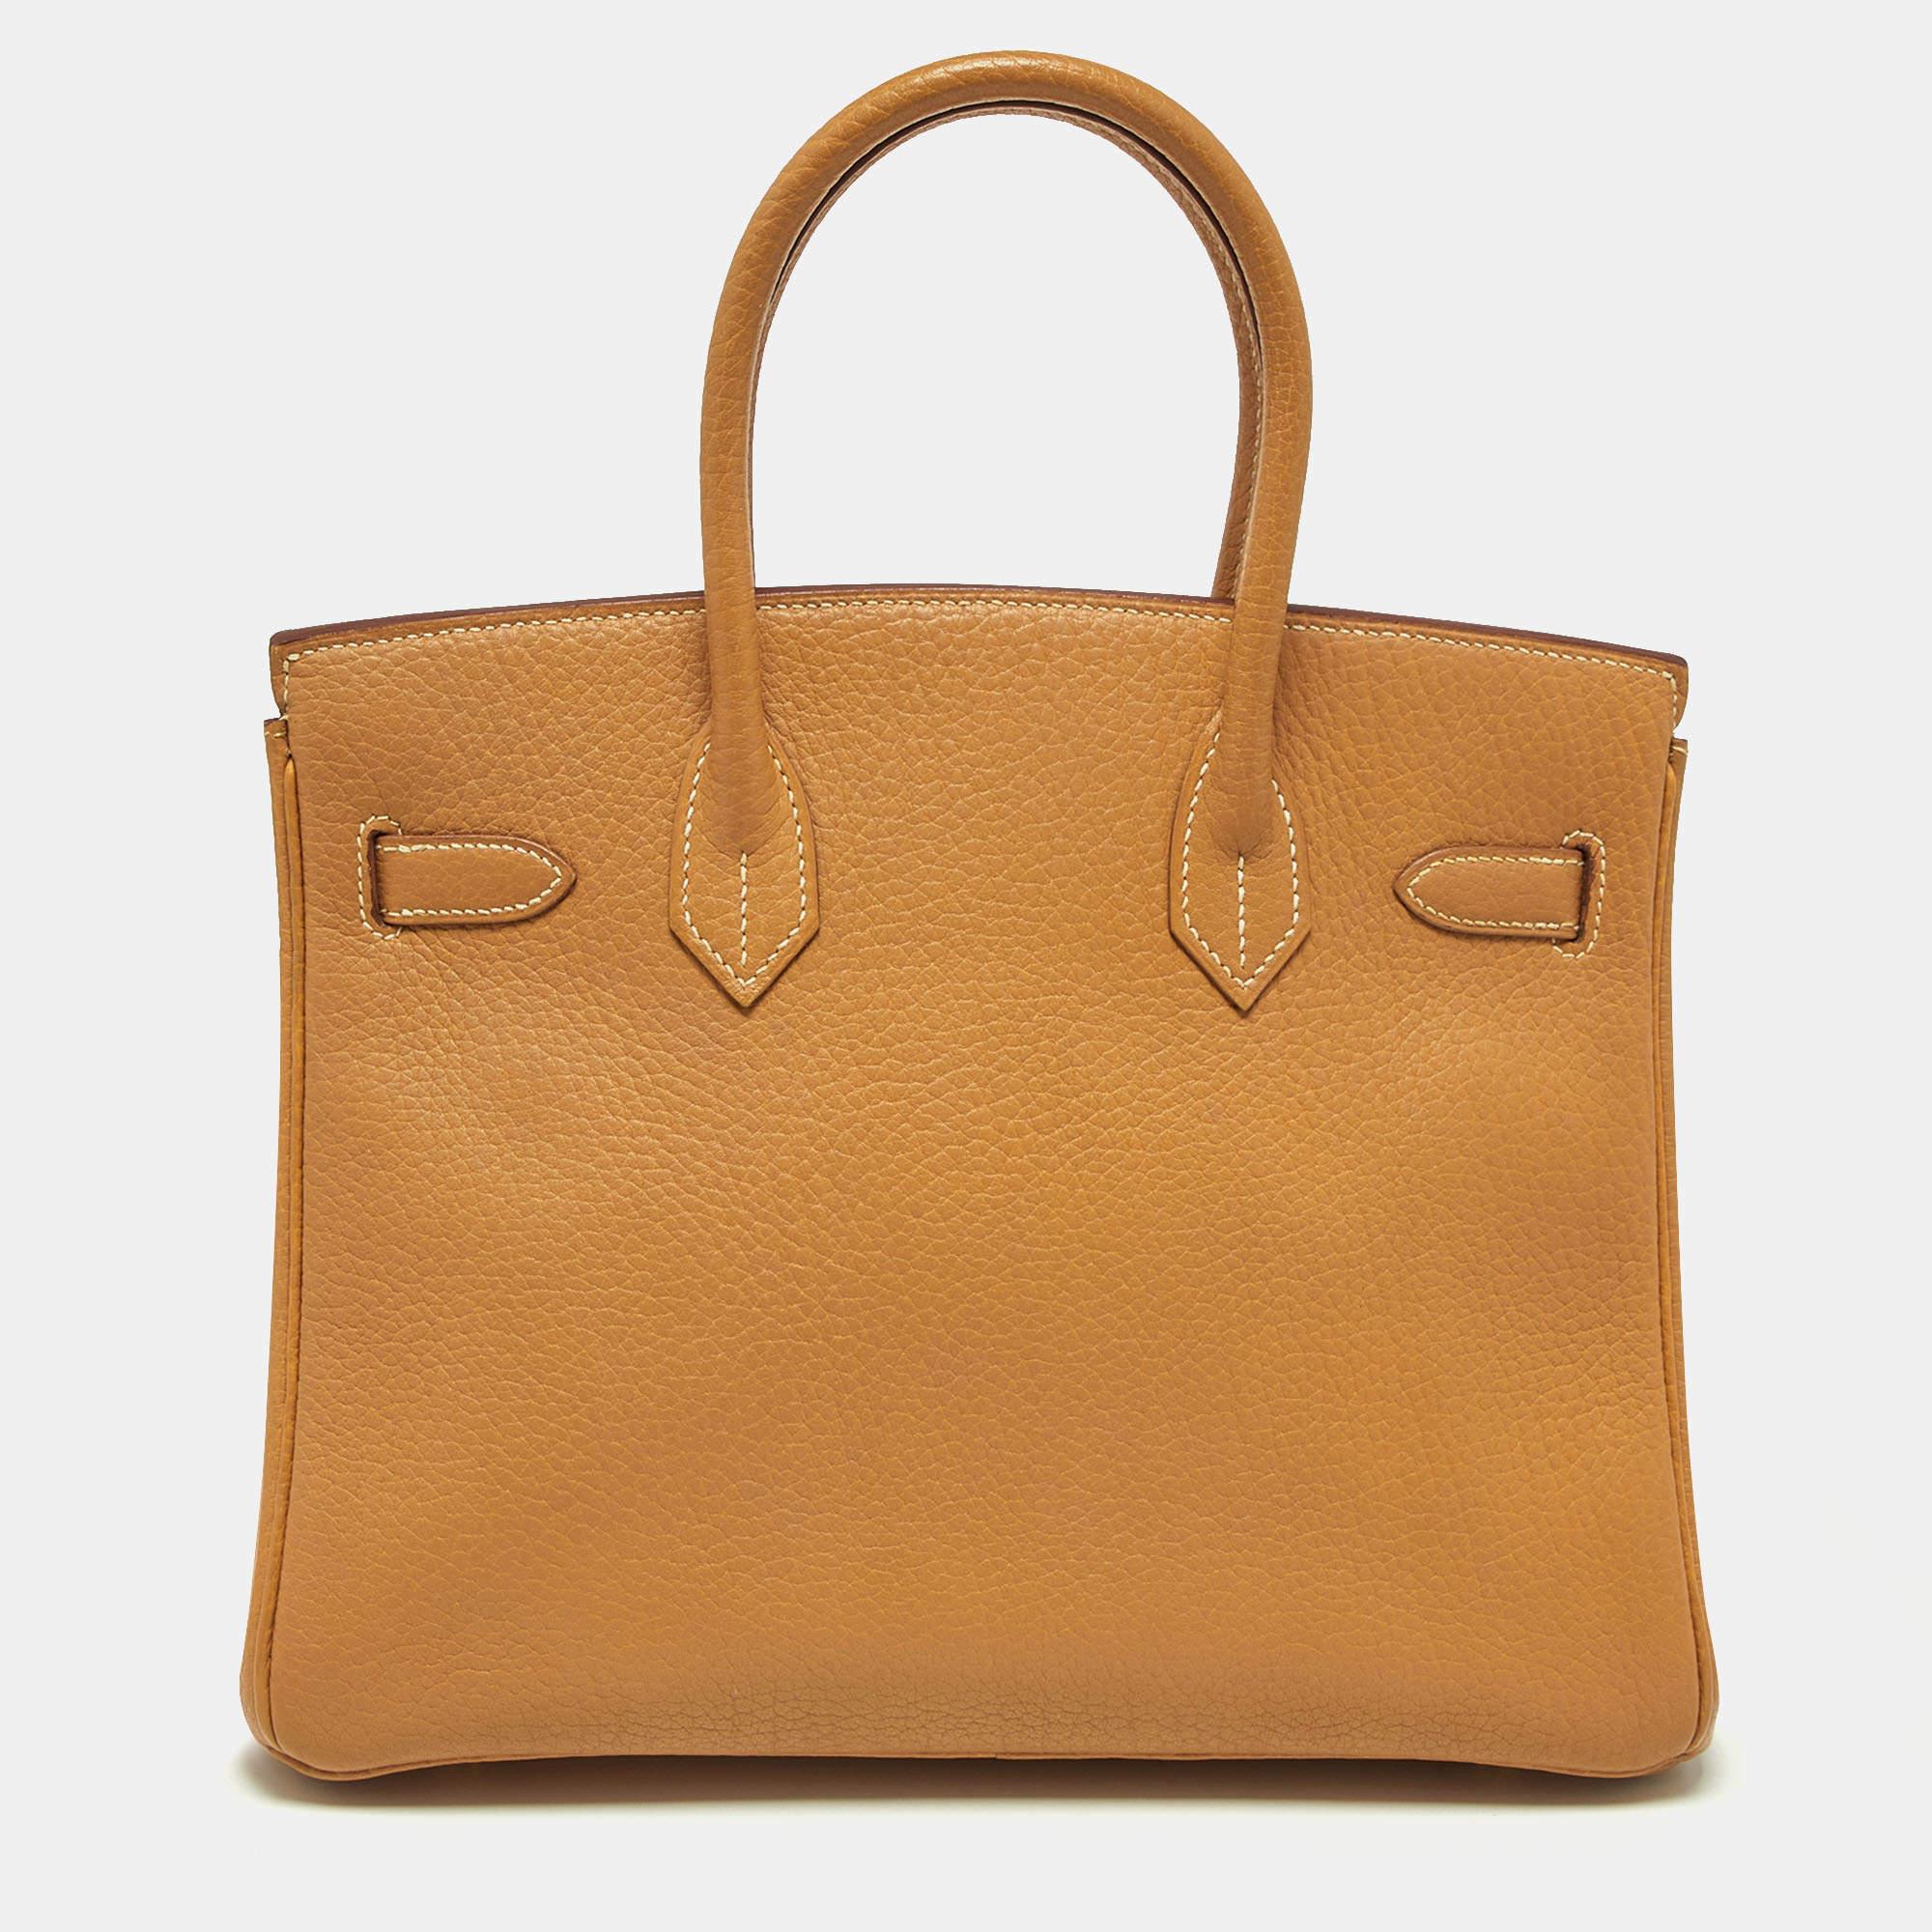 The iconic Hermès Birkin is rightly one of the most desired handbags in the world. Handcrafted from the highest quality leather by skilled artisans, it takes long hours of rigorous effort to stitch a Birkin together. Stitched using Natural Fjord